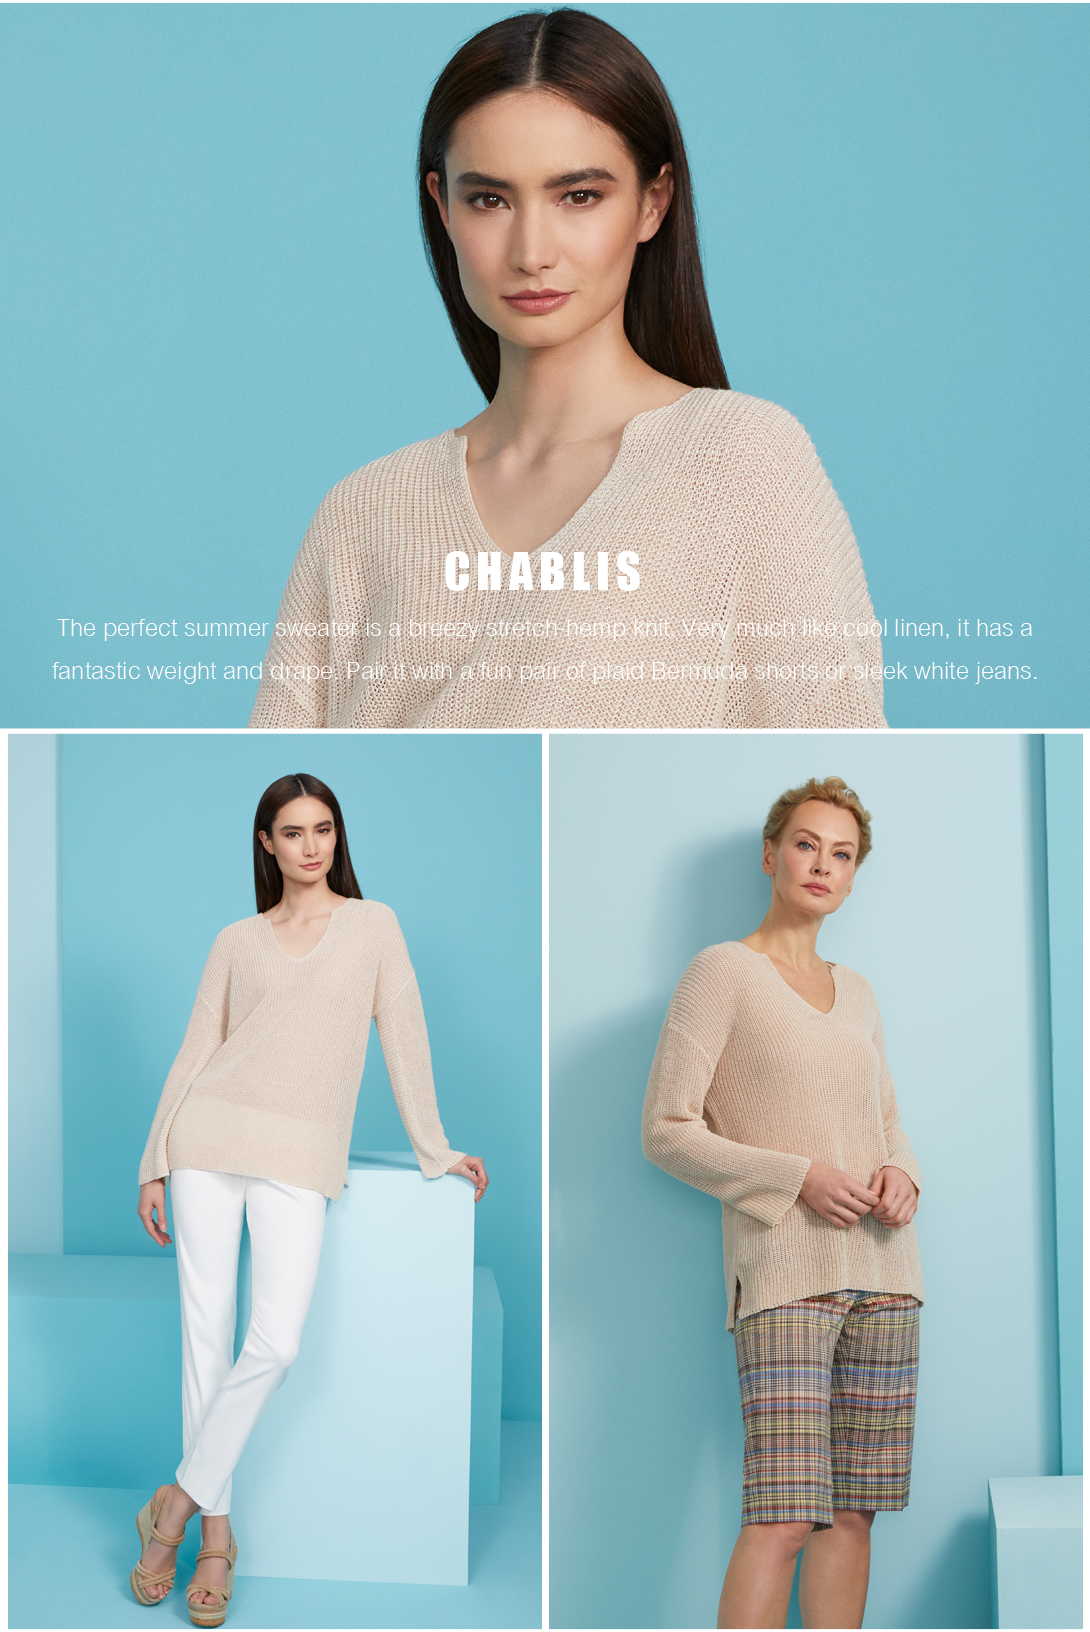 The Chablis Sweater